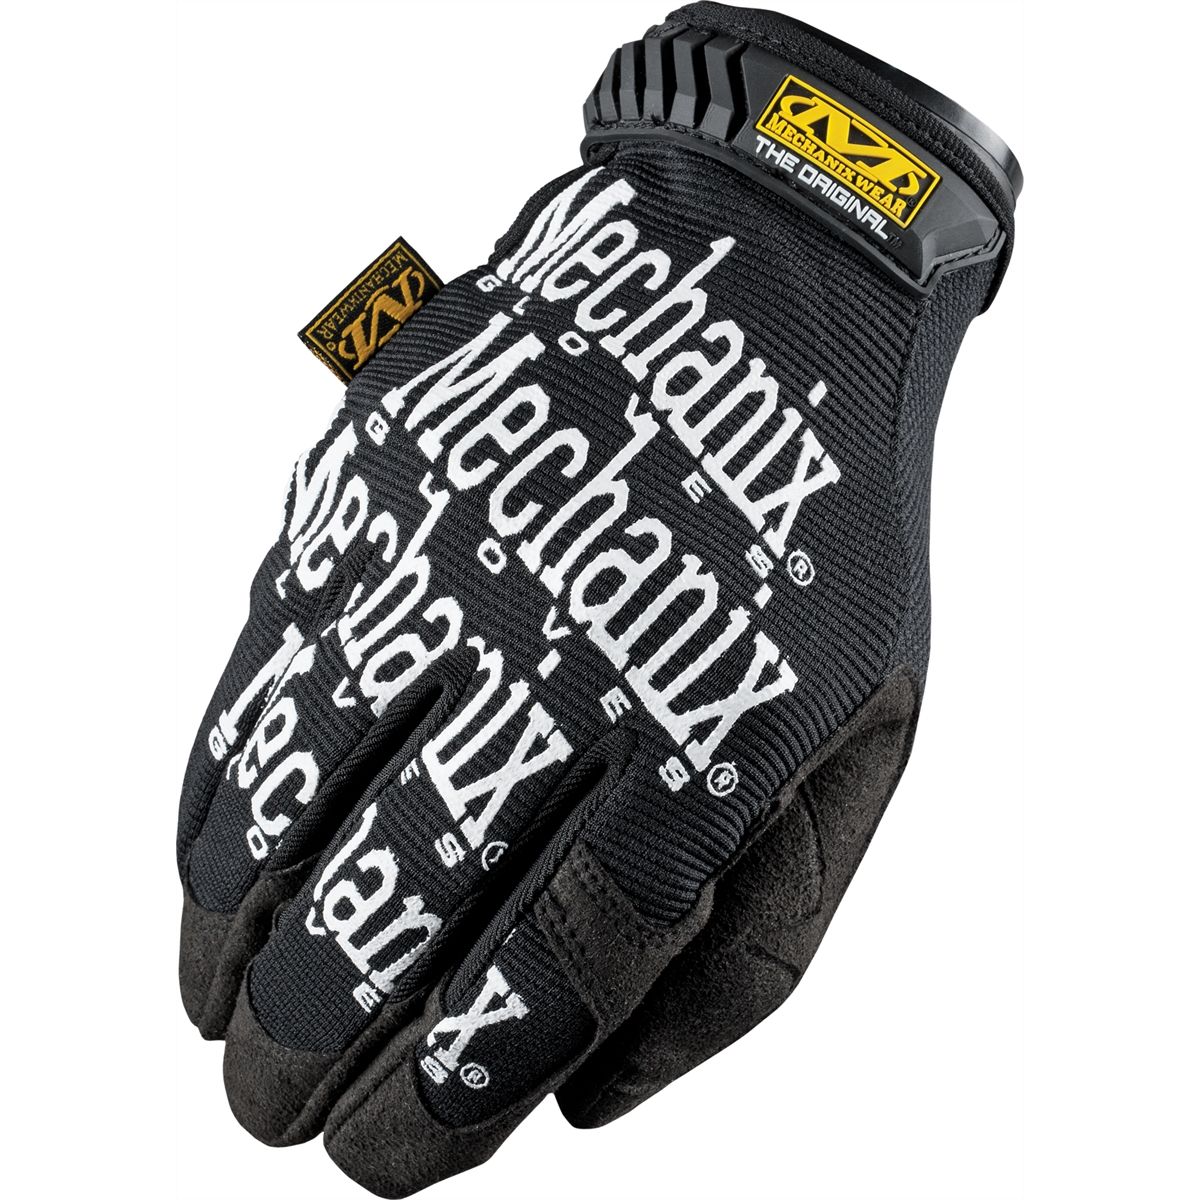 Mechanix Wear Gloves-Large Black-MG-05-010 Mechanic gloves Synthetic Leather-NEW 